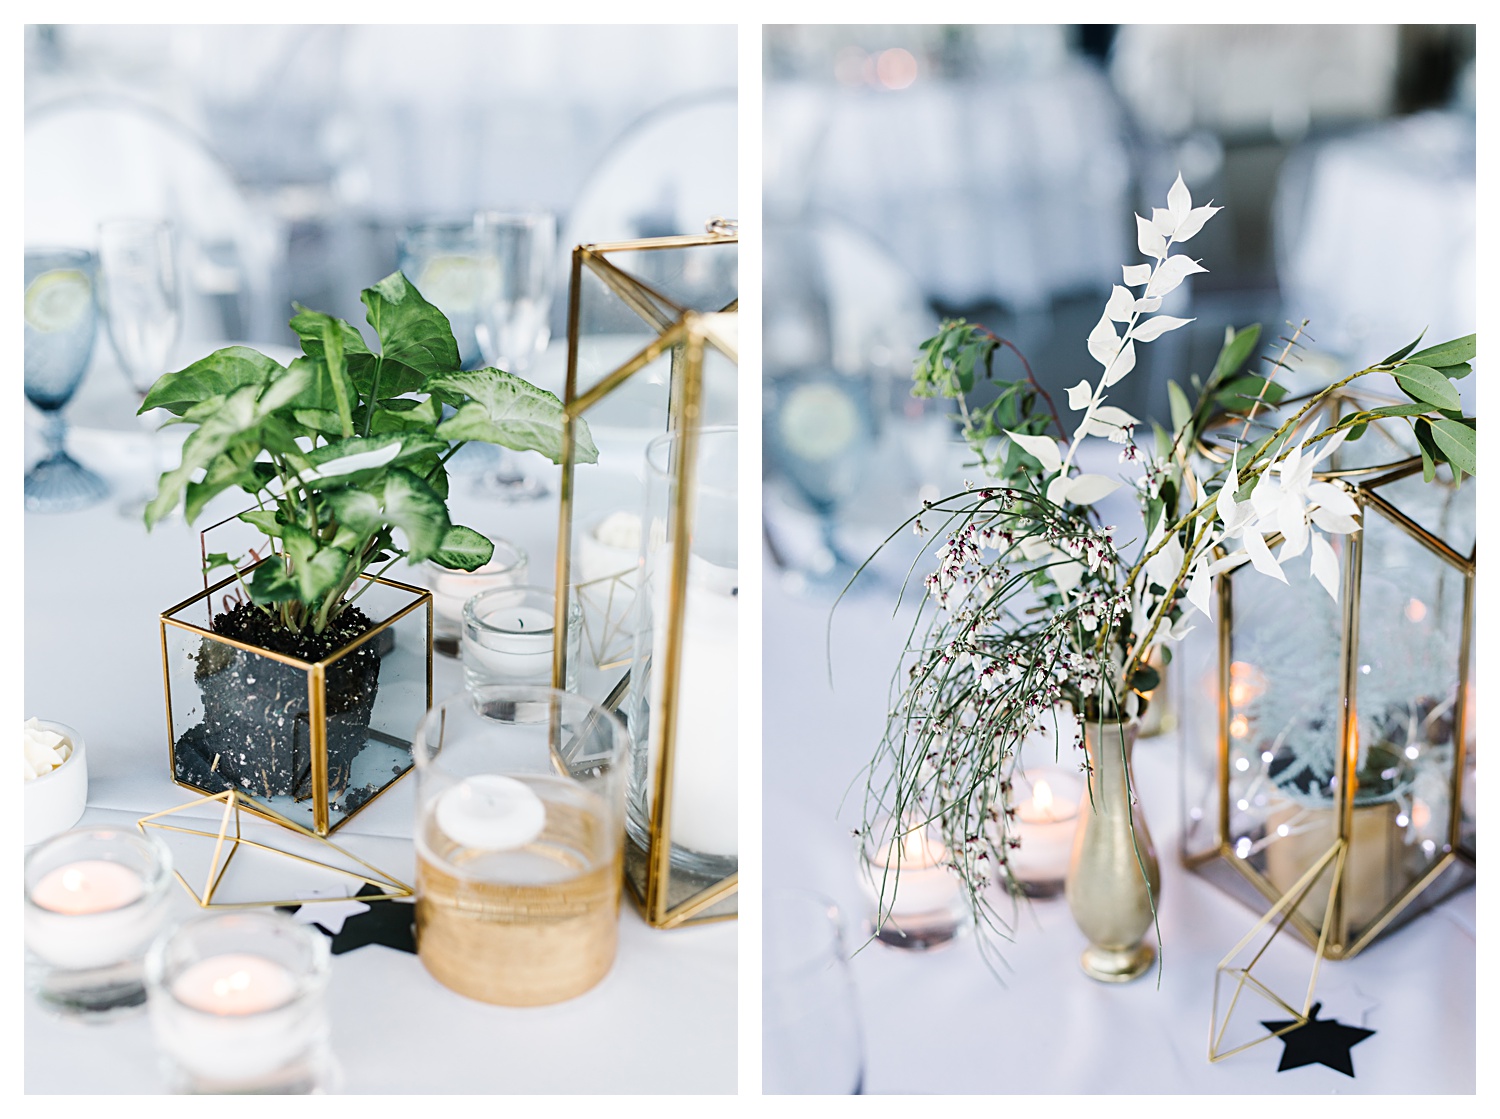 wedding centerpieces with plants and gold accents